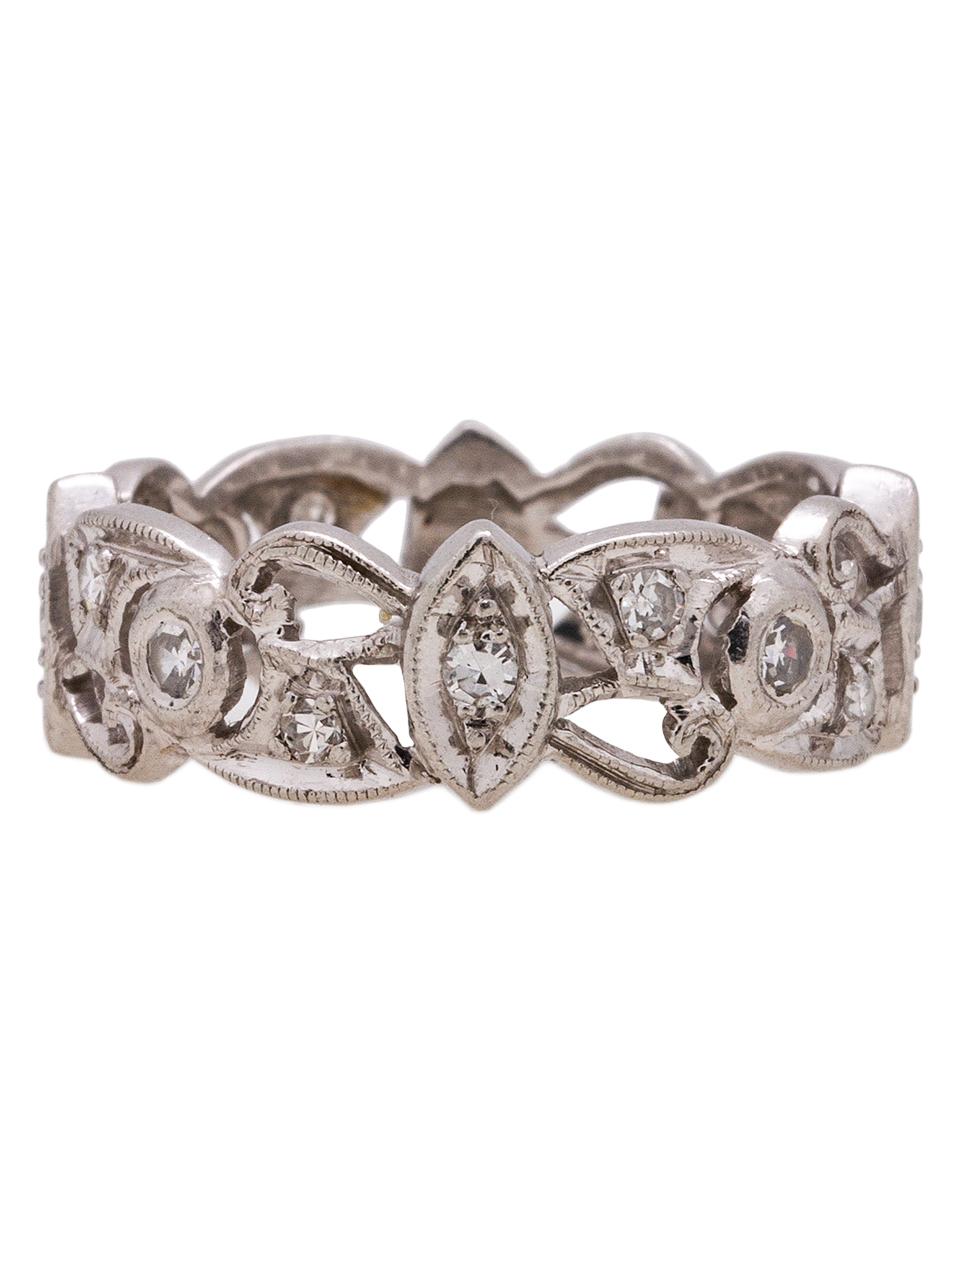 Stunning vintage wide diamond eternity band with 0.32ct single cuts, G-H/VS-SI. Lovely flowing floral retro design with marquise and round settings. Size 7.5, cannot adjust ring size. Circa 1940's.

SKU: 42468